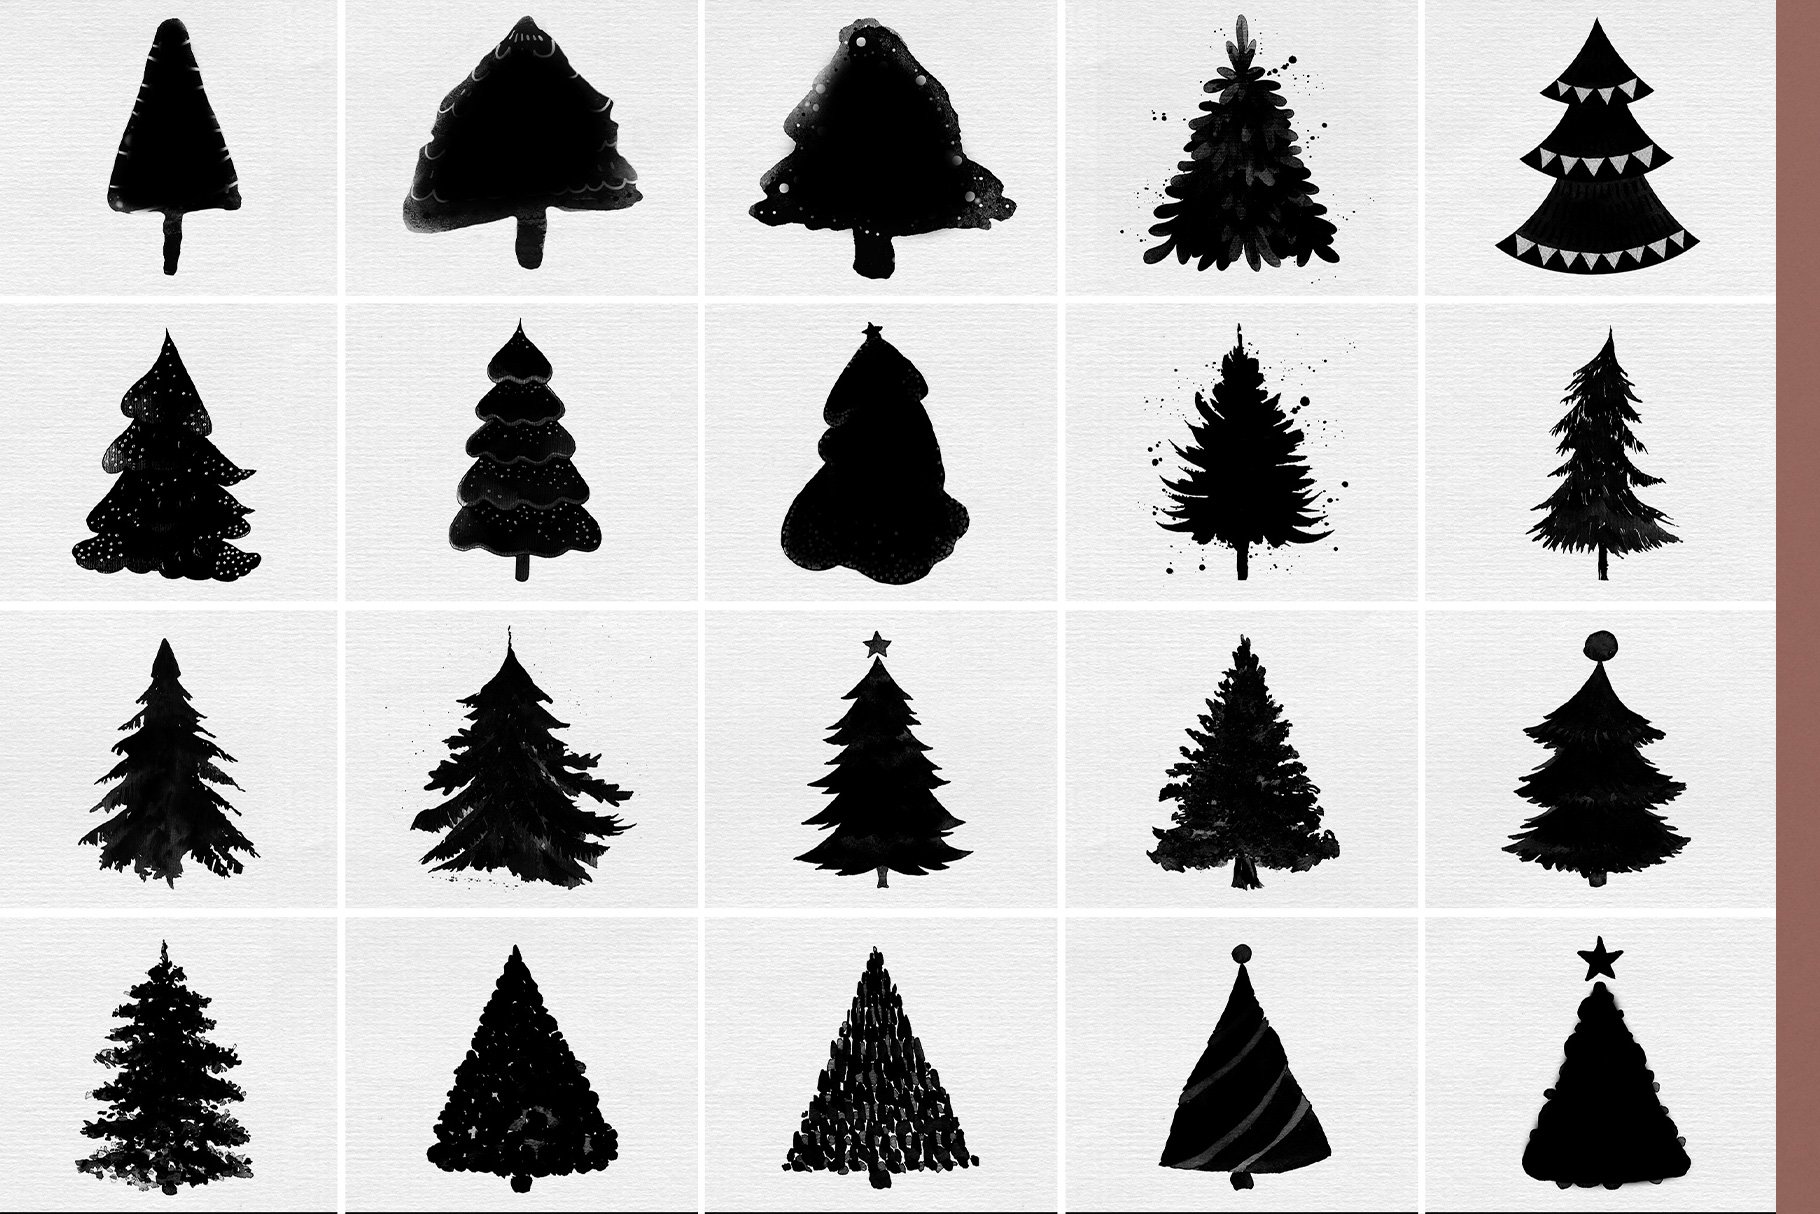 Christmas trees photo maskspreview image.